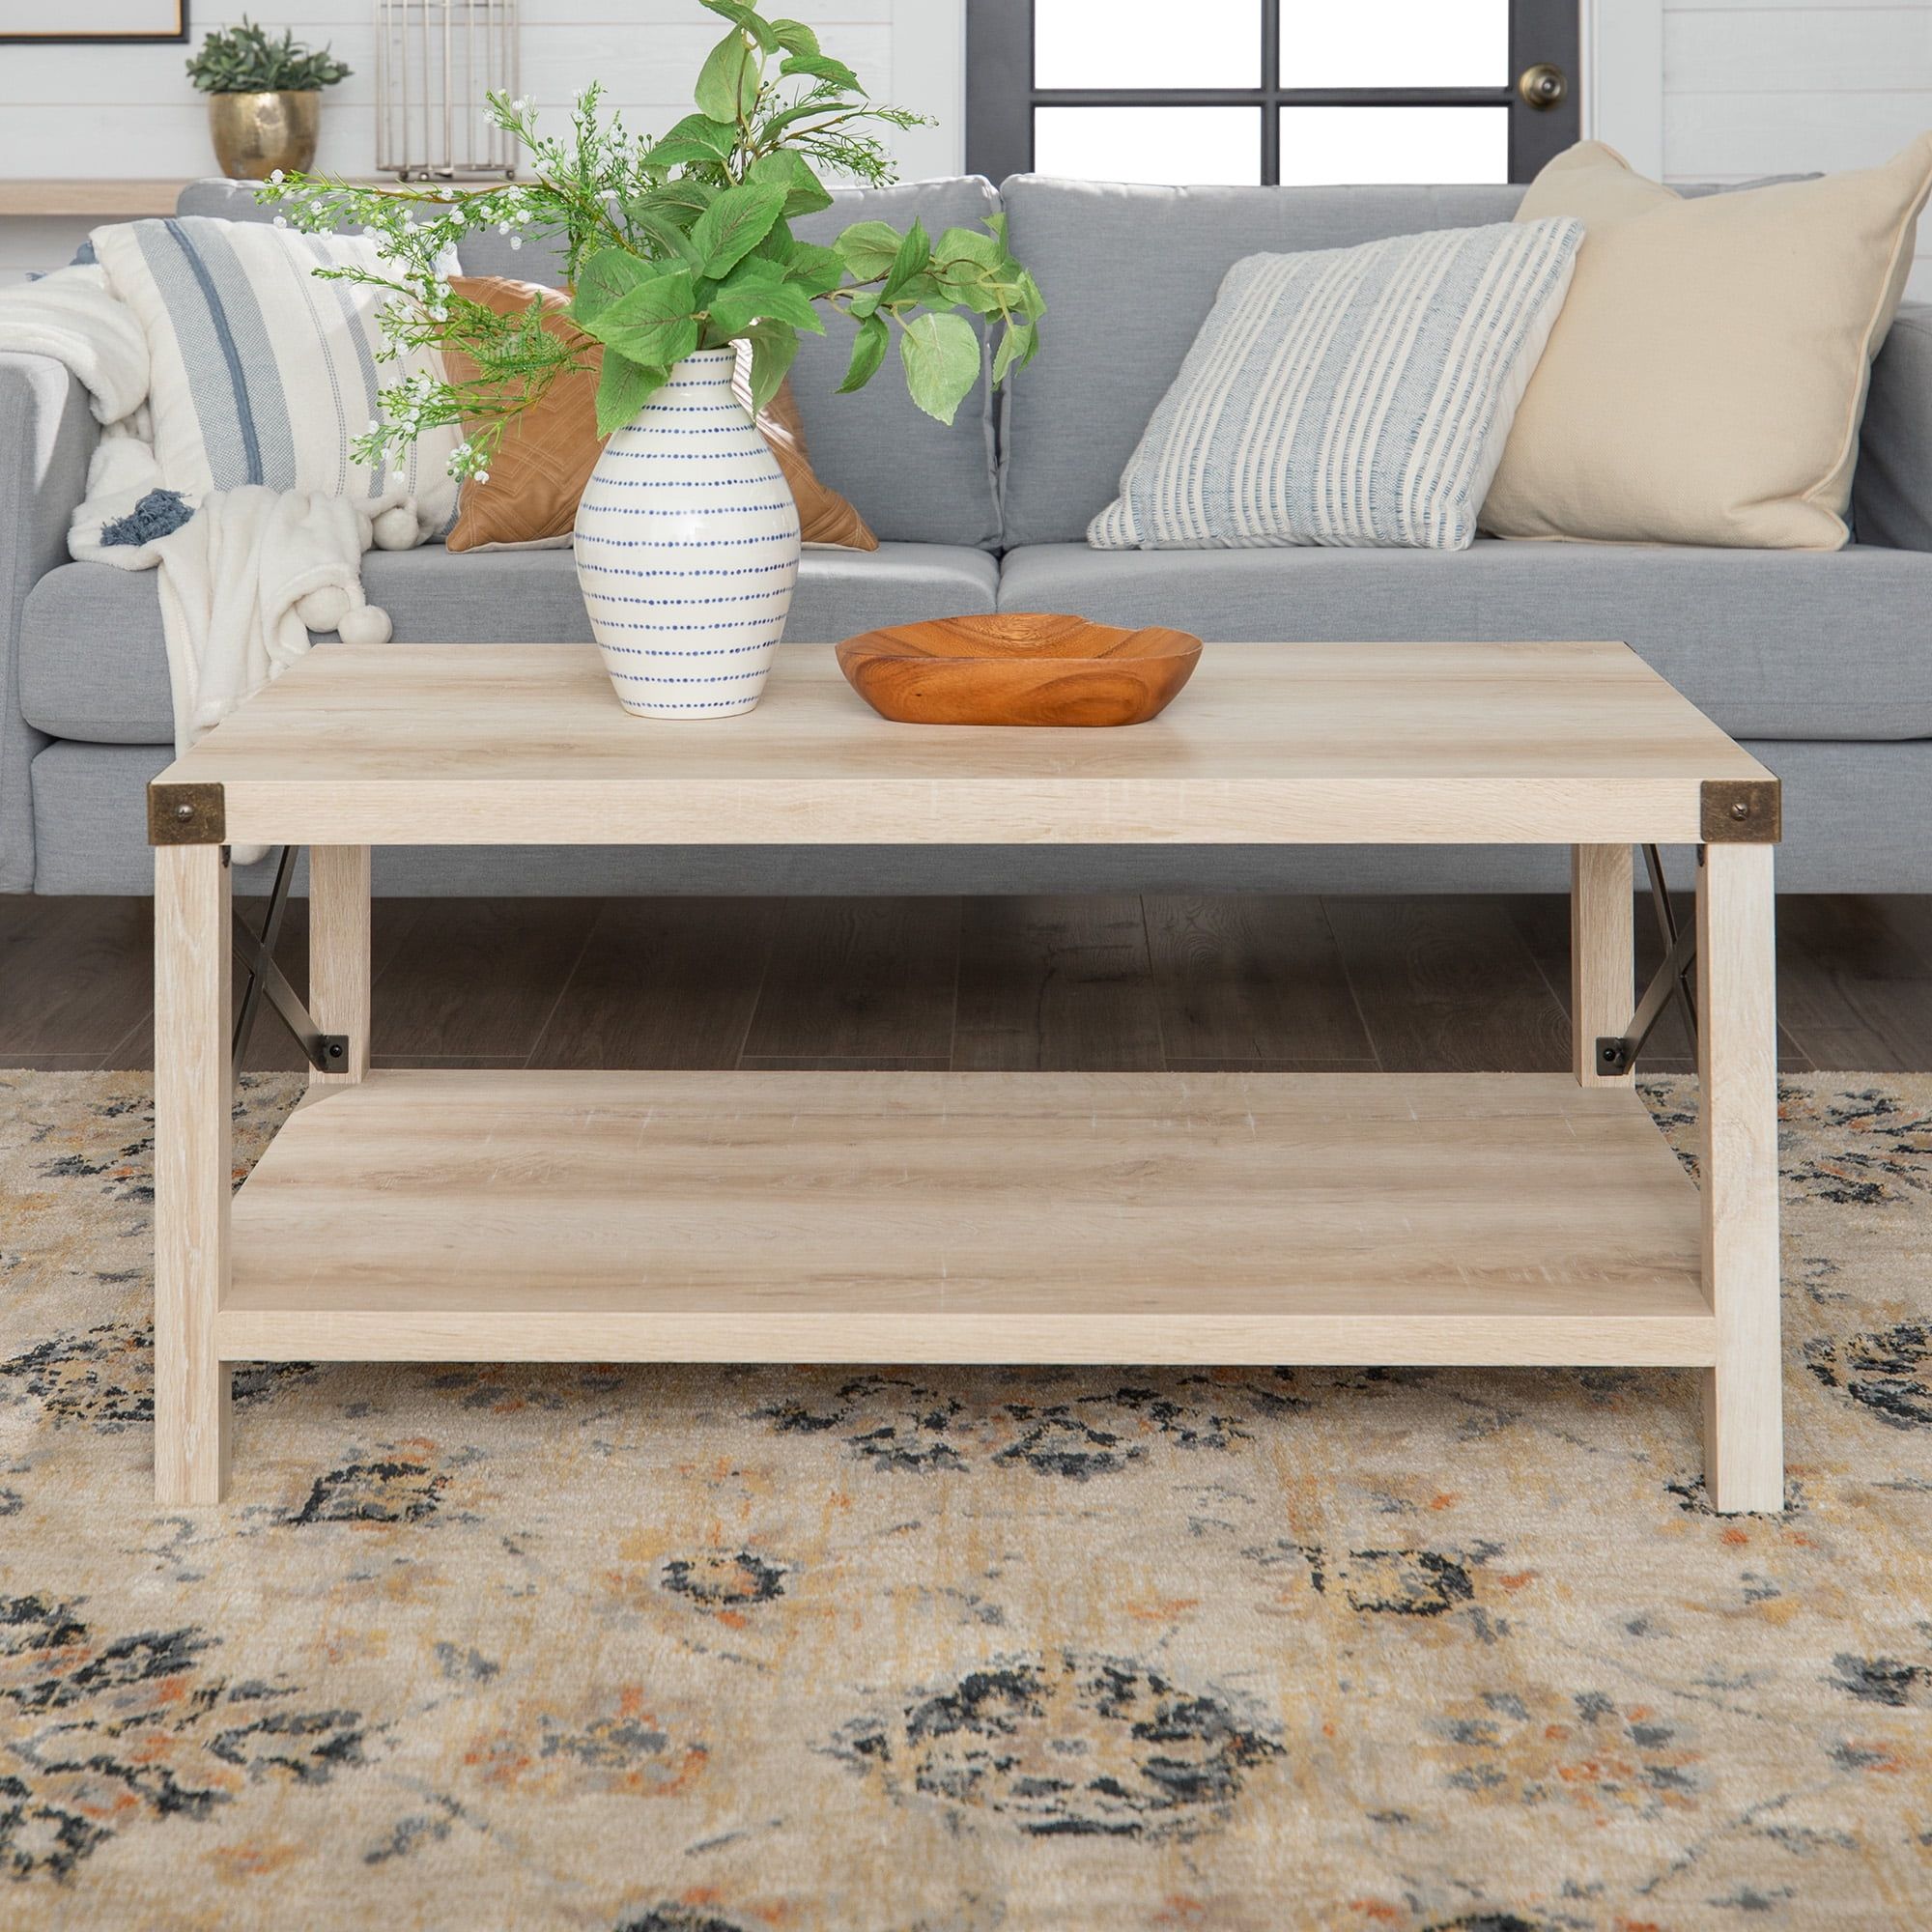 Woven Paths Magnolia Metal X Coffee Table, White Oak – Walmart For Woven Paths Coffee Tables (Gallery 9 of 20)